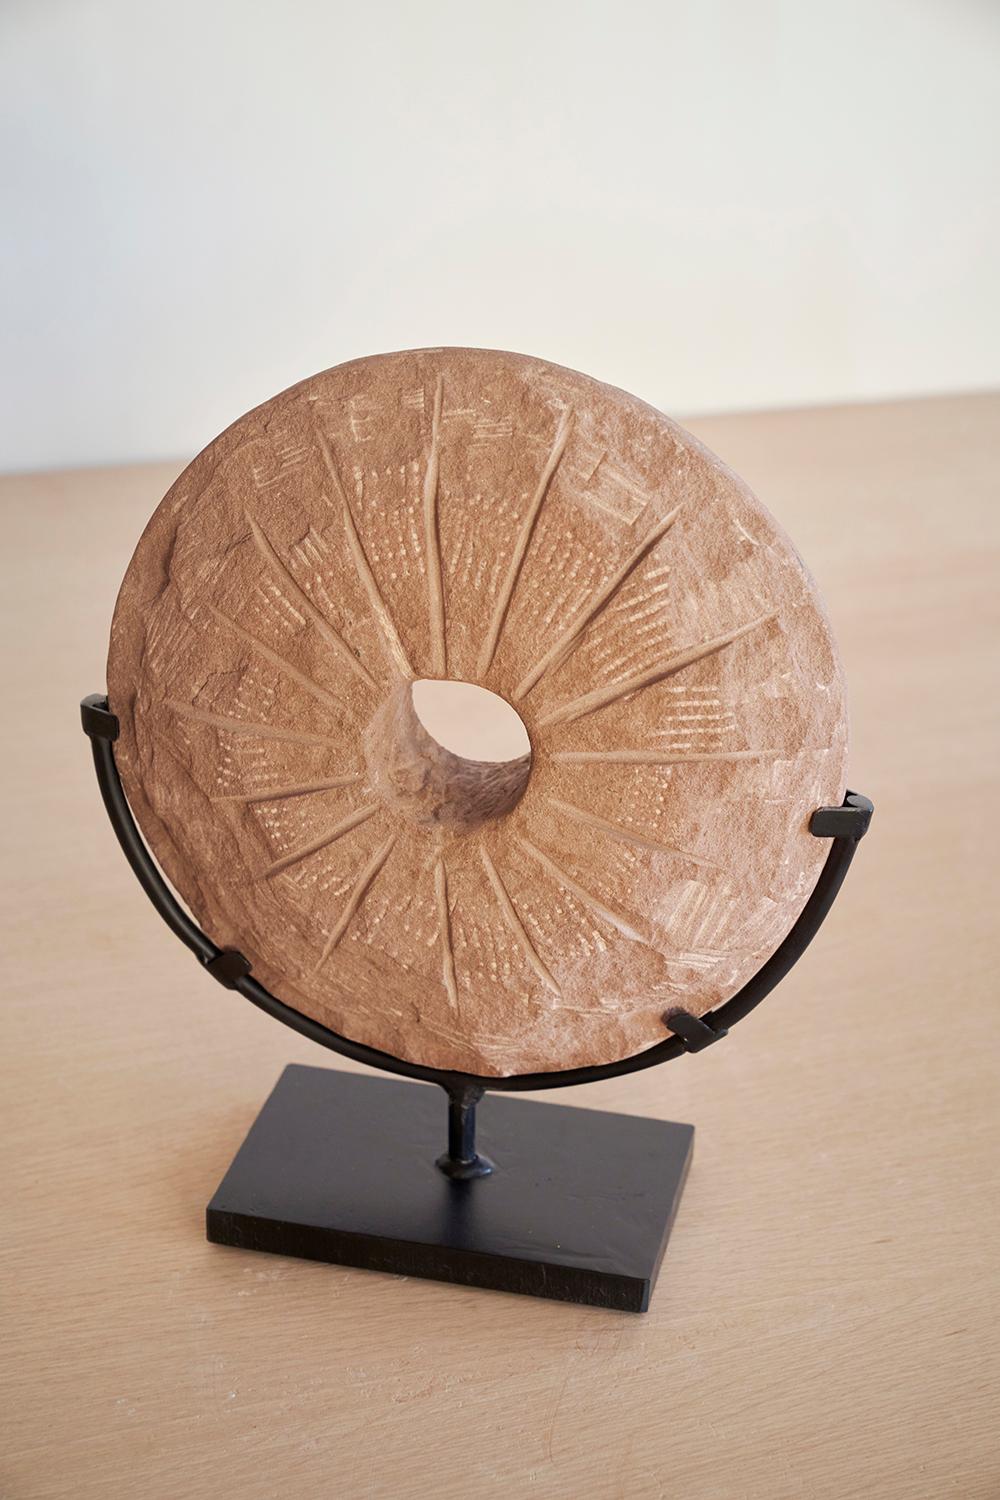 Modern Small The Wheel Of Time Sculpture by Jean-Baptiste Van Den Heede For Sale